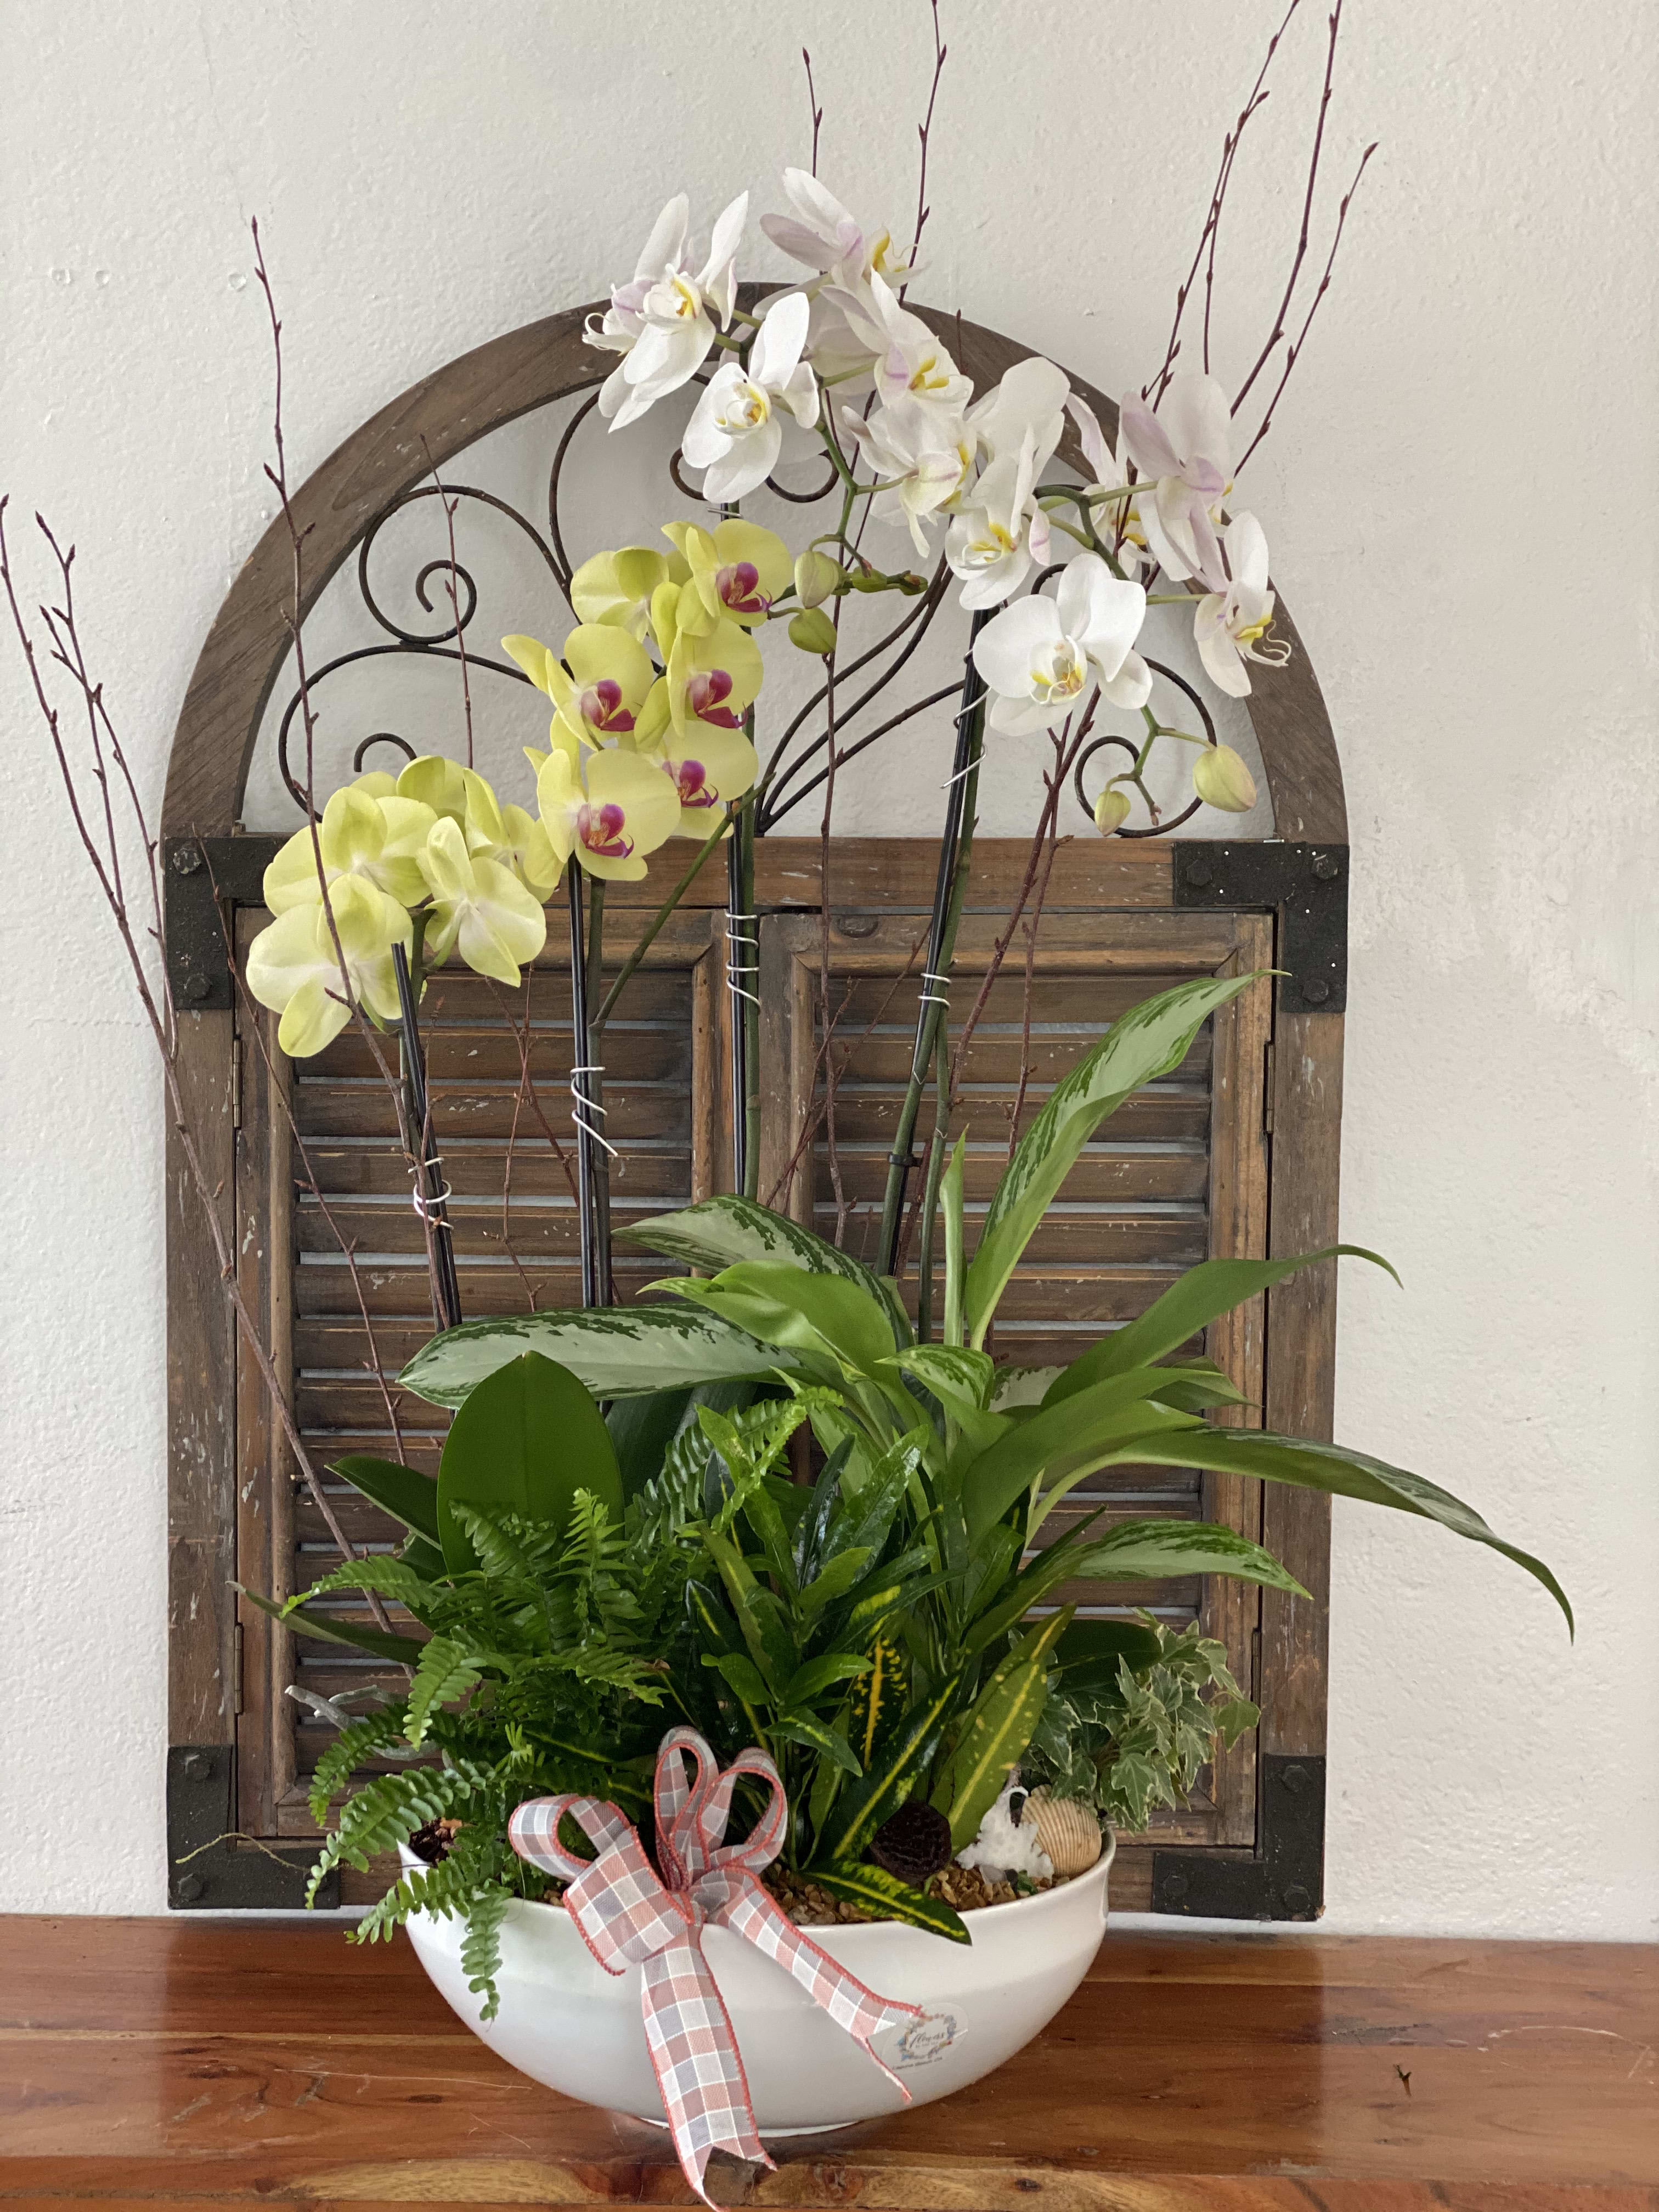 Blooming Orchids  - Our yellow orchid offers a fresh warmth and beauty that your special recipient will treasure. This stunning phalaenopsis orchid plant displays pale yellow blooms with a white throat blossoming against its attractive green foliage to create a long lasting gift that inspires them with its sunlit sophistication. Presented in a white ceramic container, making it easily contribute to the style of any room, this orchid plant is set to make an exceptional thank you, get well, or happy birthday gift.